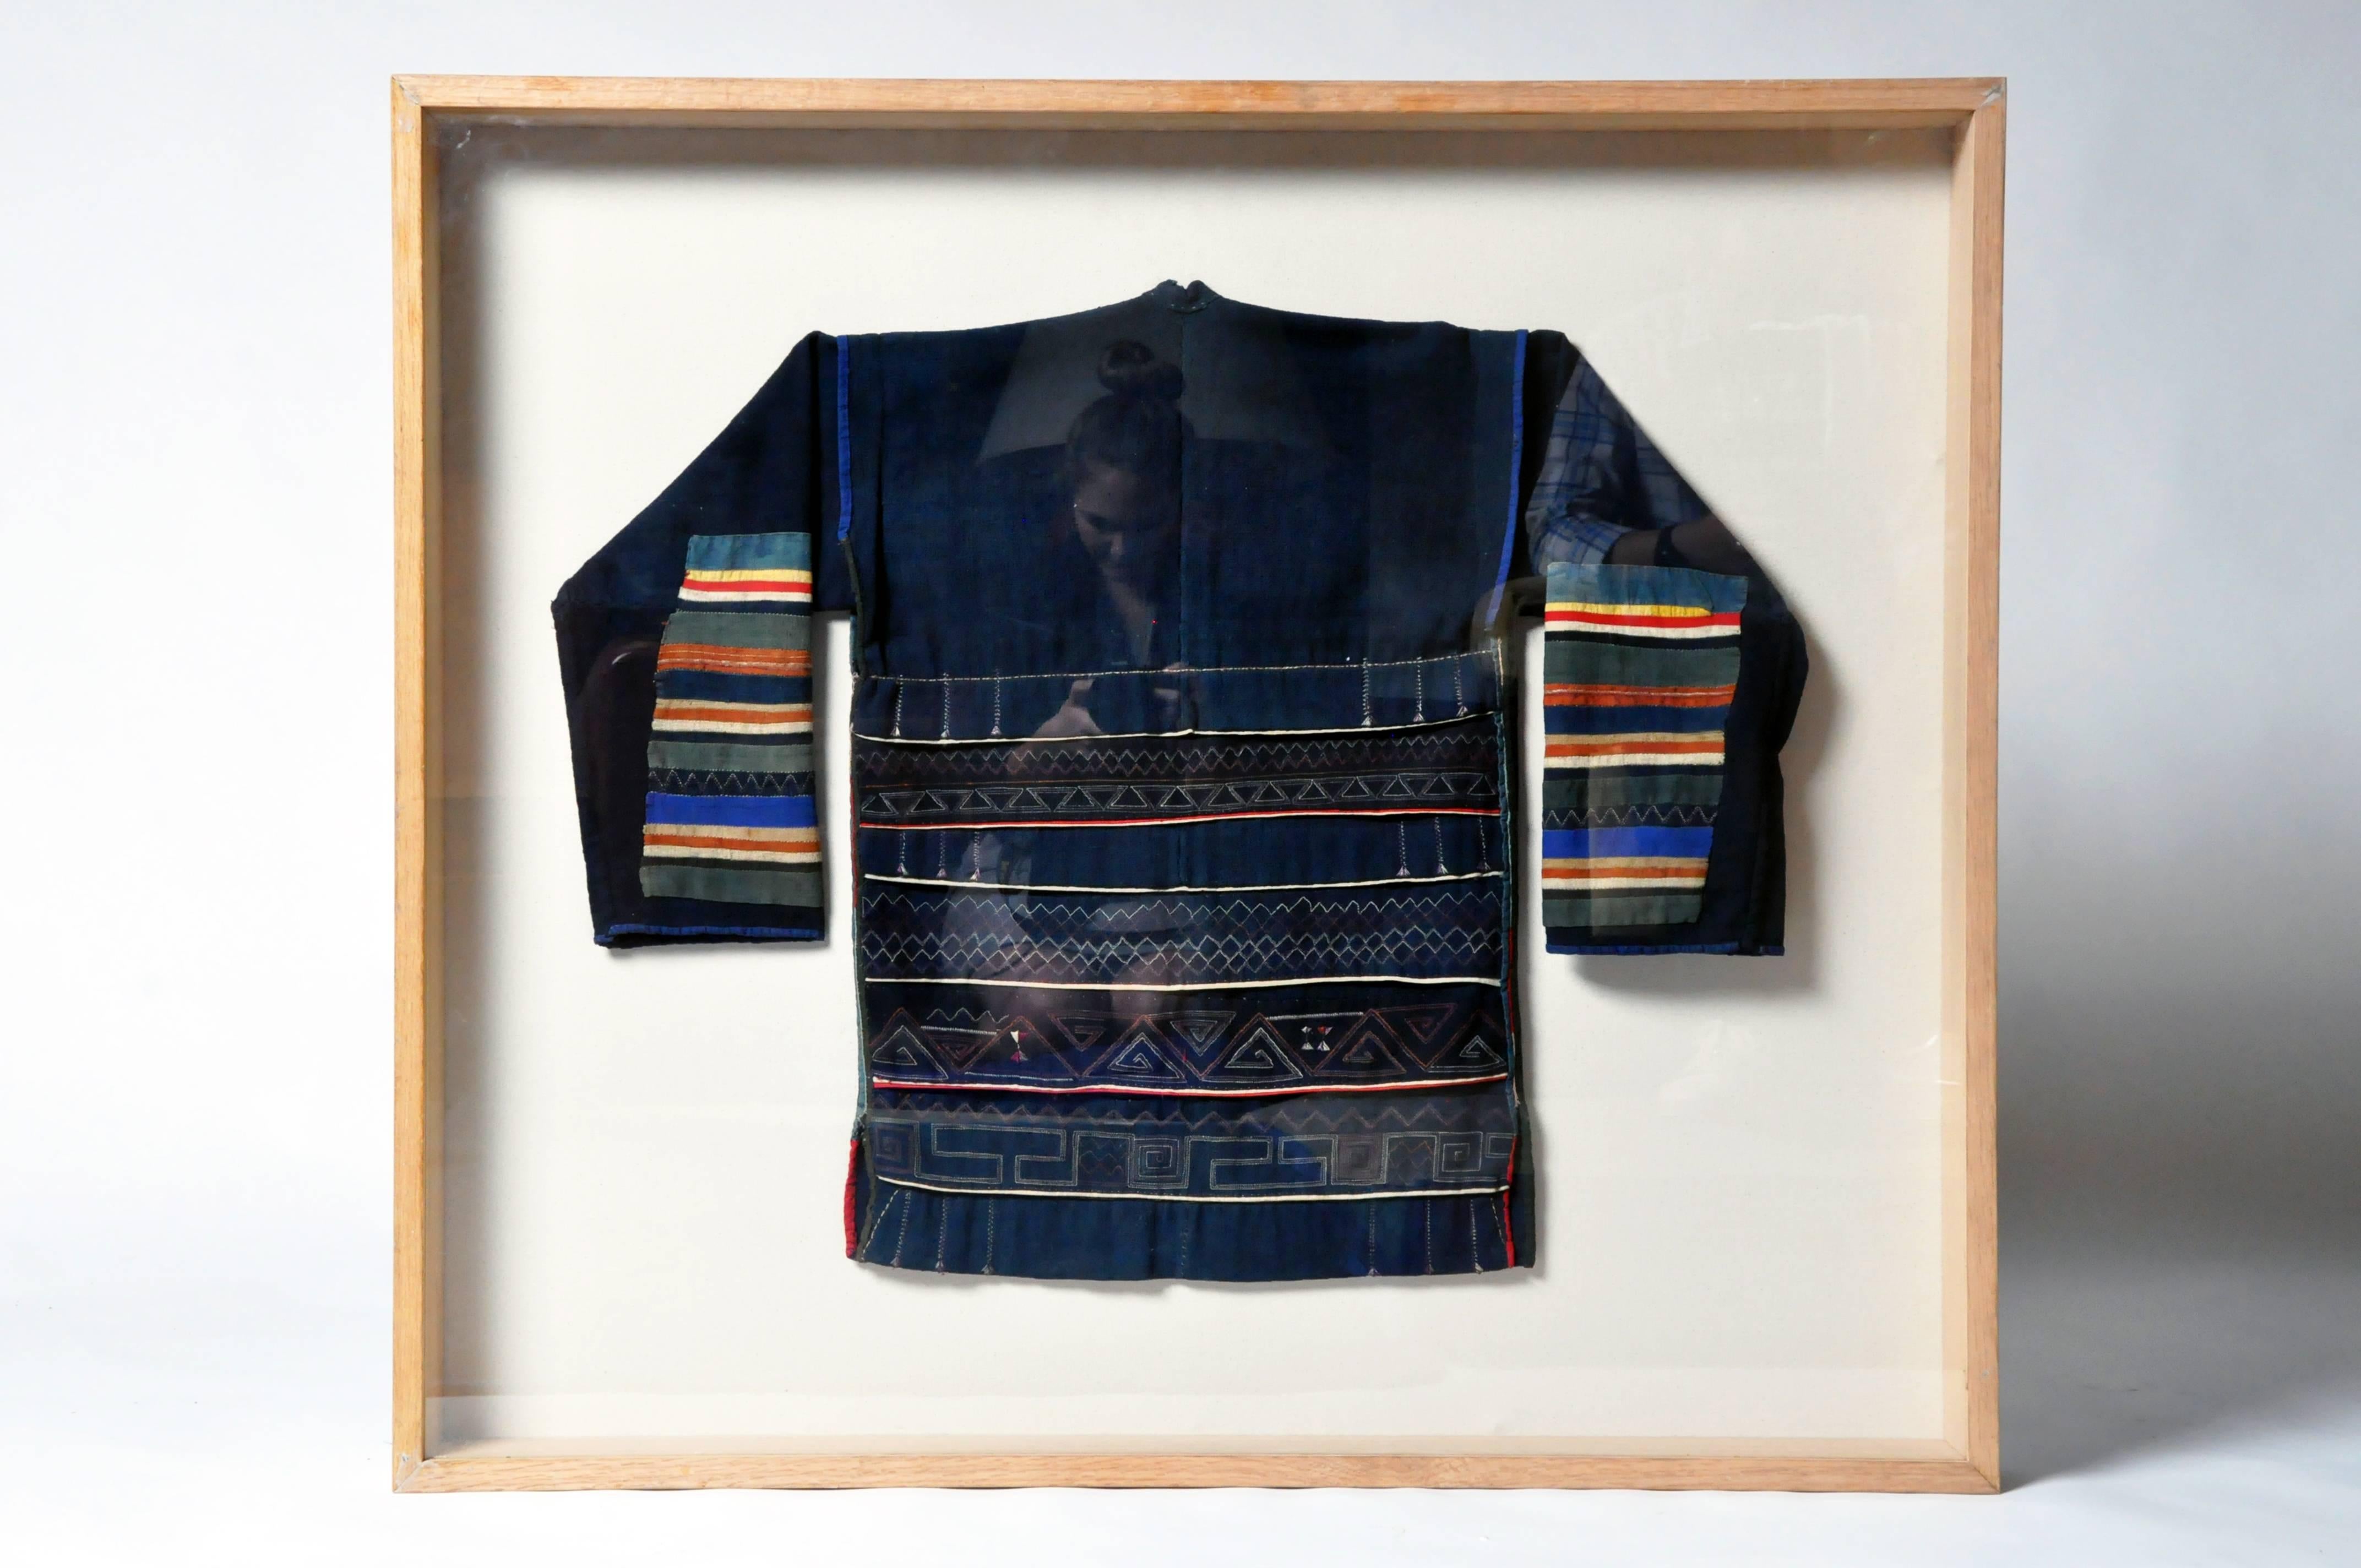 Framed man's jacket from the Akha Tribe. The Akha are an indigenous hill tribe who live in small villages at higher elevations in the mountains of Thailand, Burma, Laos, and Yunnan Province in China. They made their way from China into Southeast